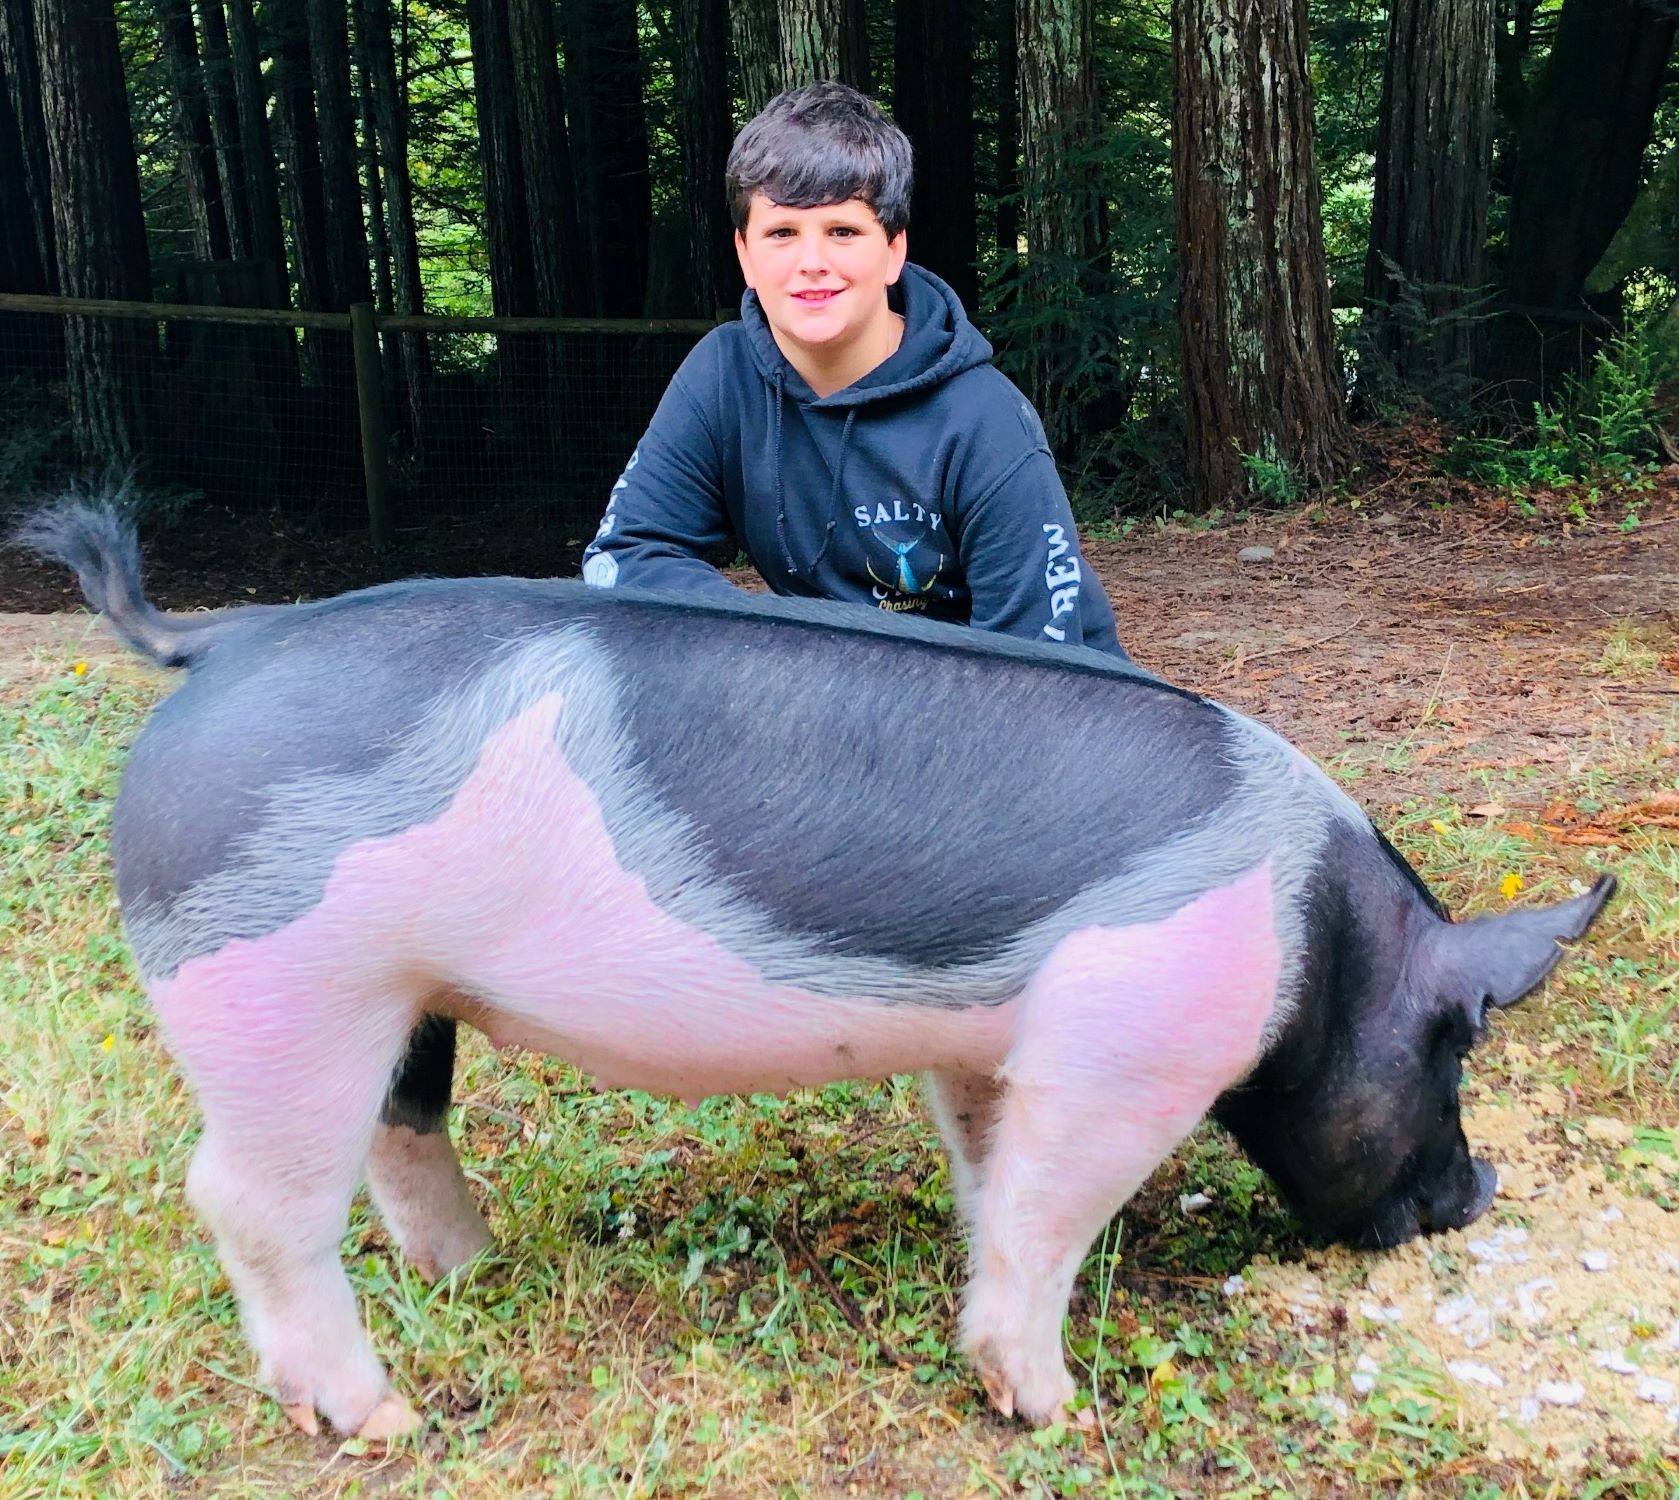 Brooks with his pig.